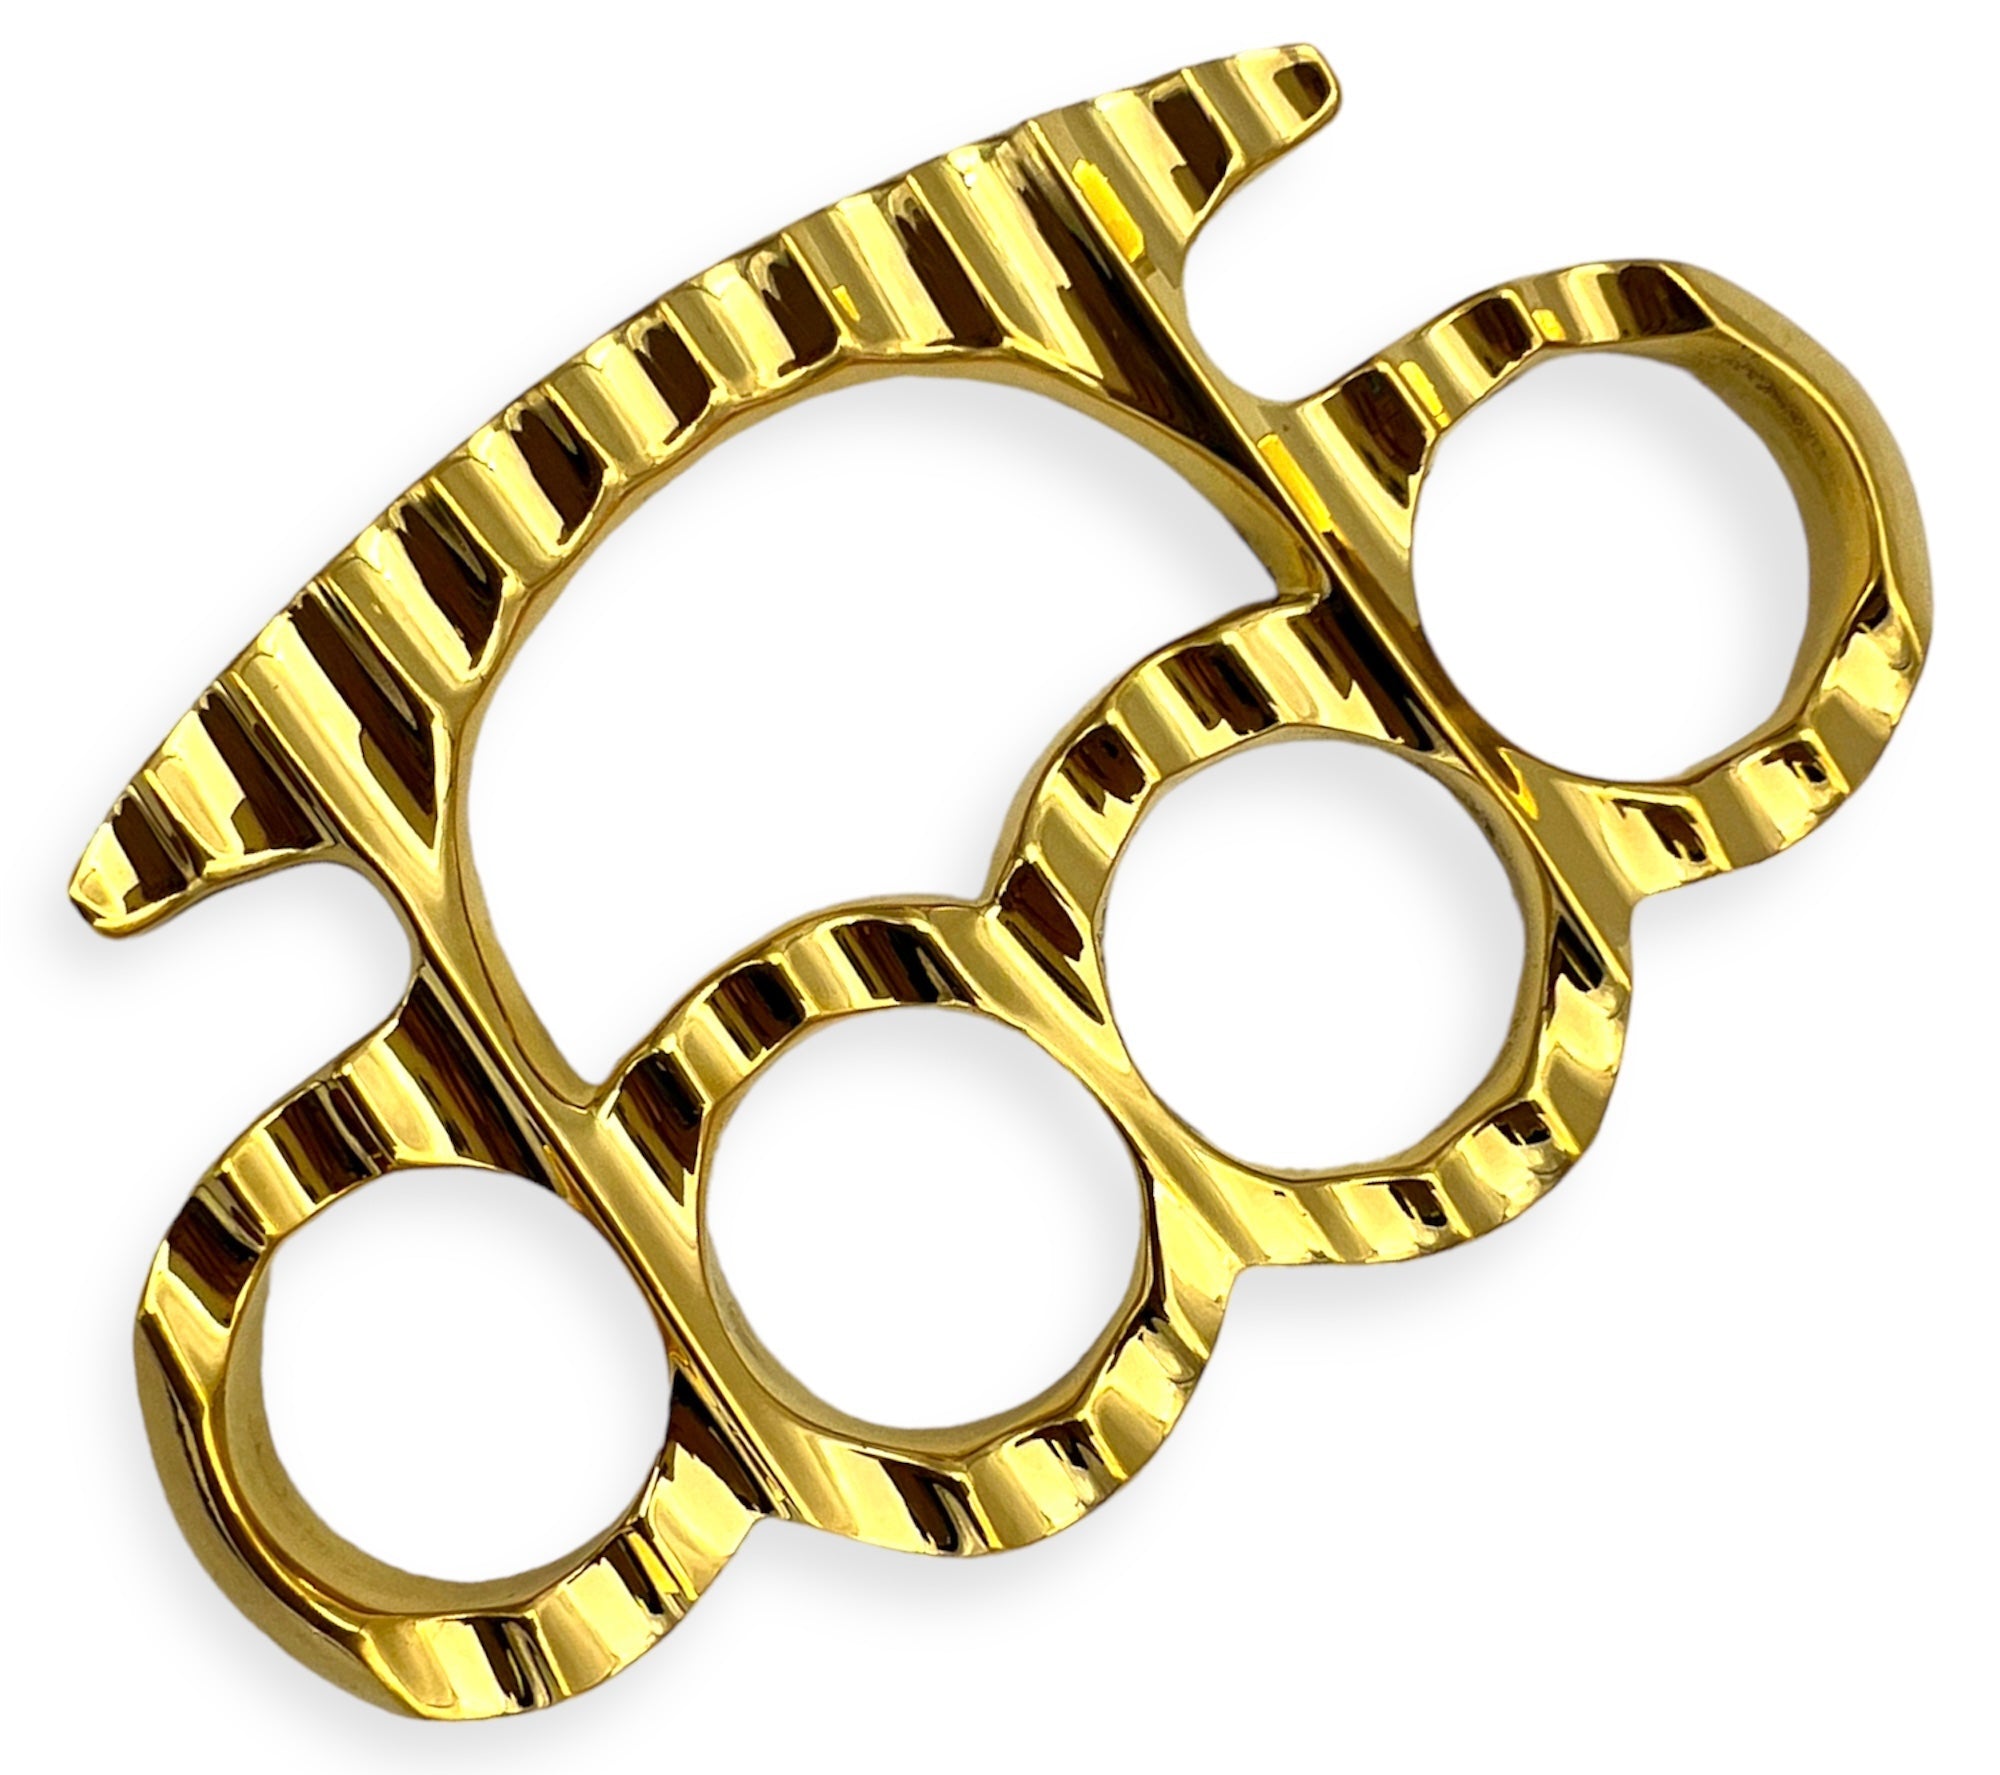 20pcs Zinc Alloy Metal Brass Knuckles Charms For Jewelry Making